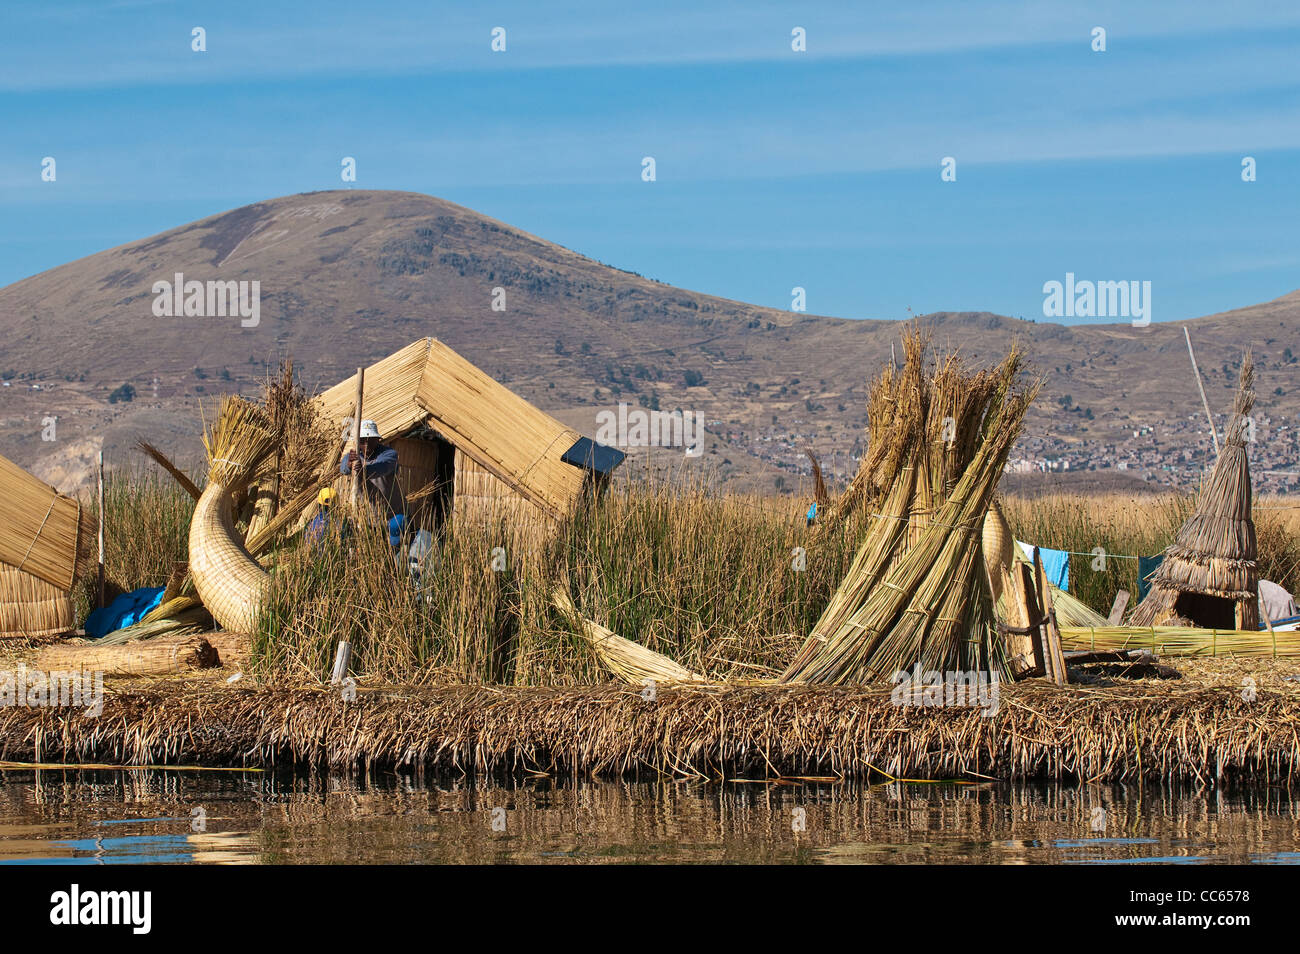 Peru, Lake Titicaca. Quechua or Uros Indian village on the floating Uros Islands. Stock Photo